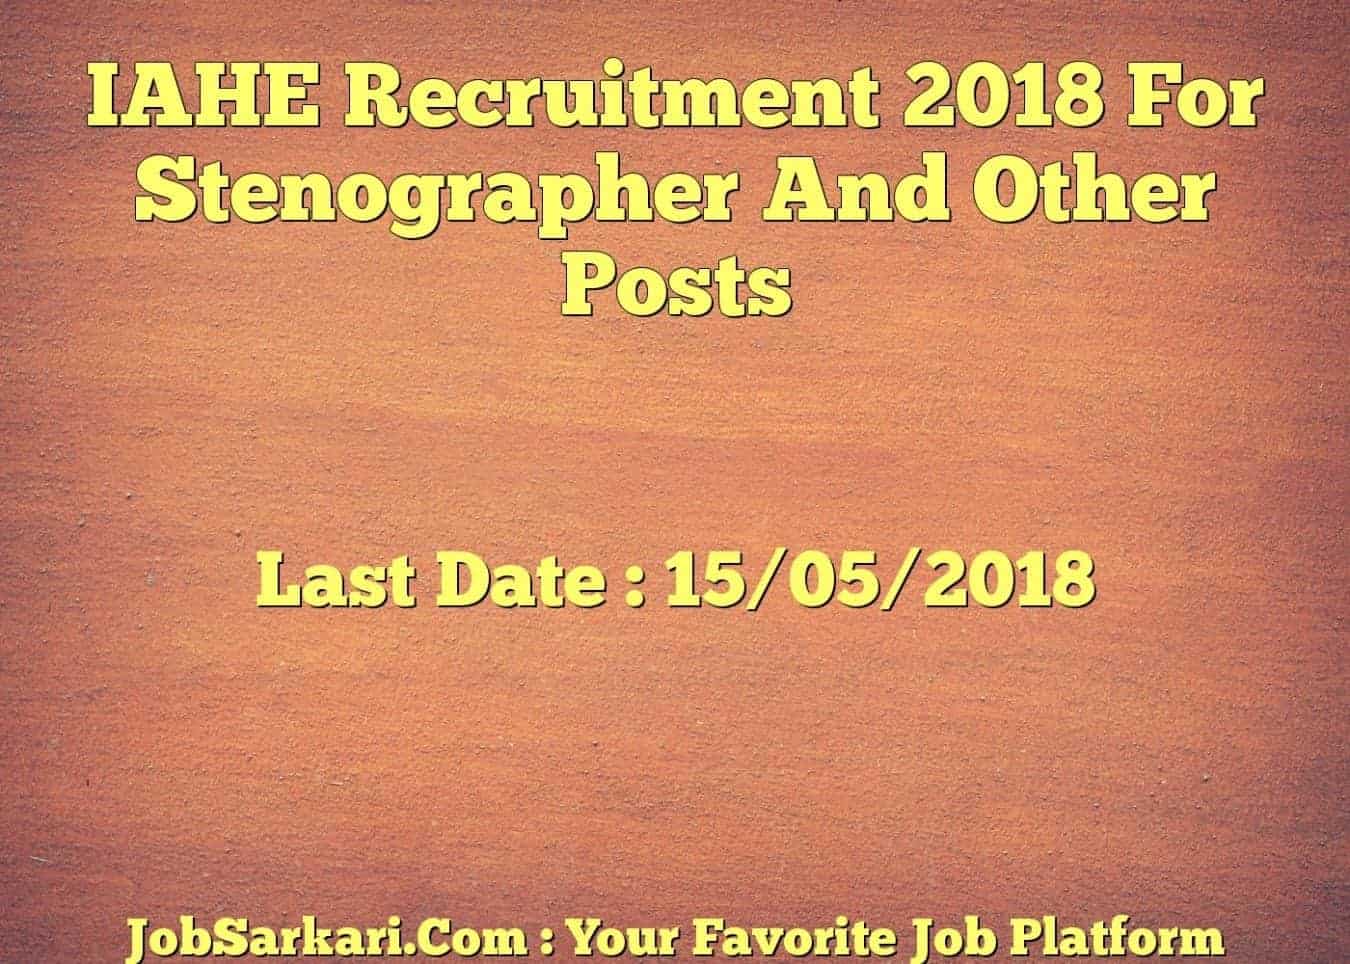 IAHE Recruitment 2018 For Stenographer And Other Posts